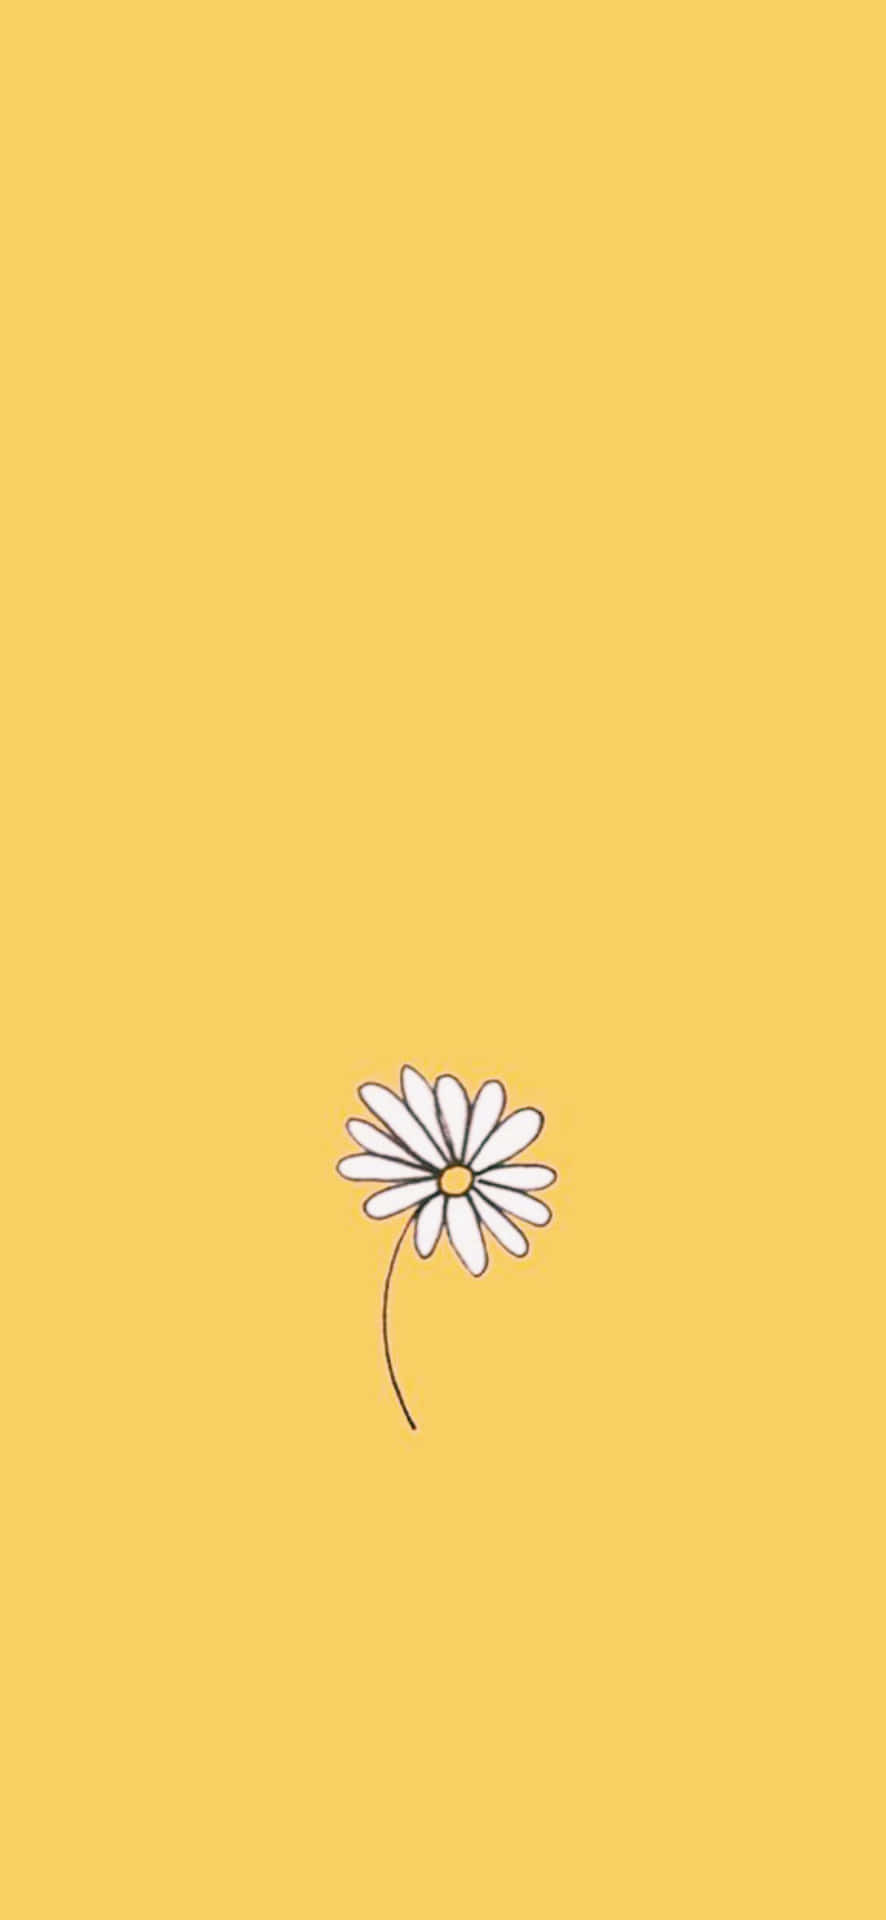 Enhance the beauty of your iPhone with this inspirational sunflower aesthetic wallpaper Wallpaper